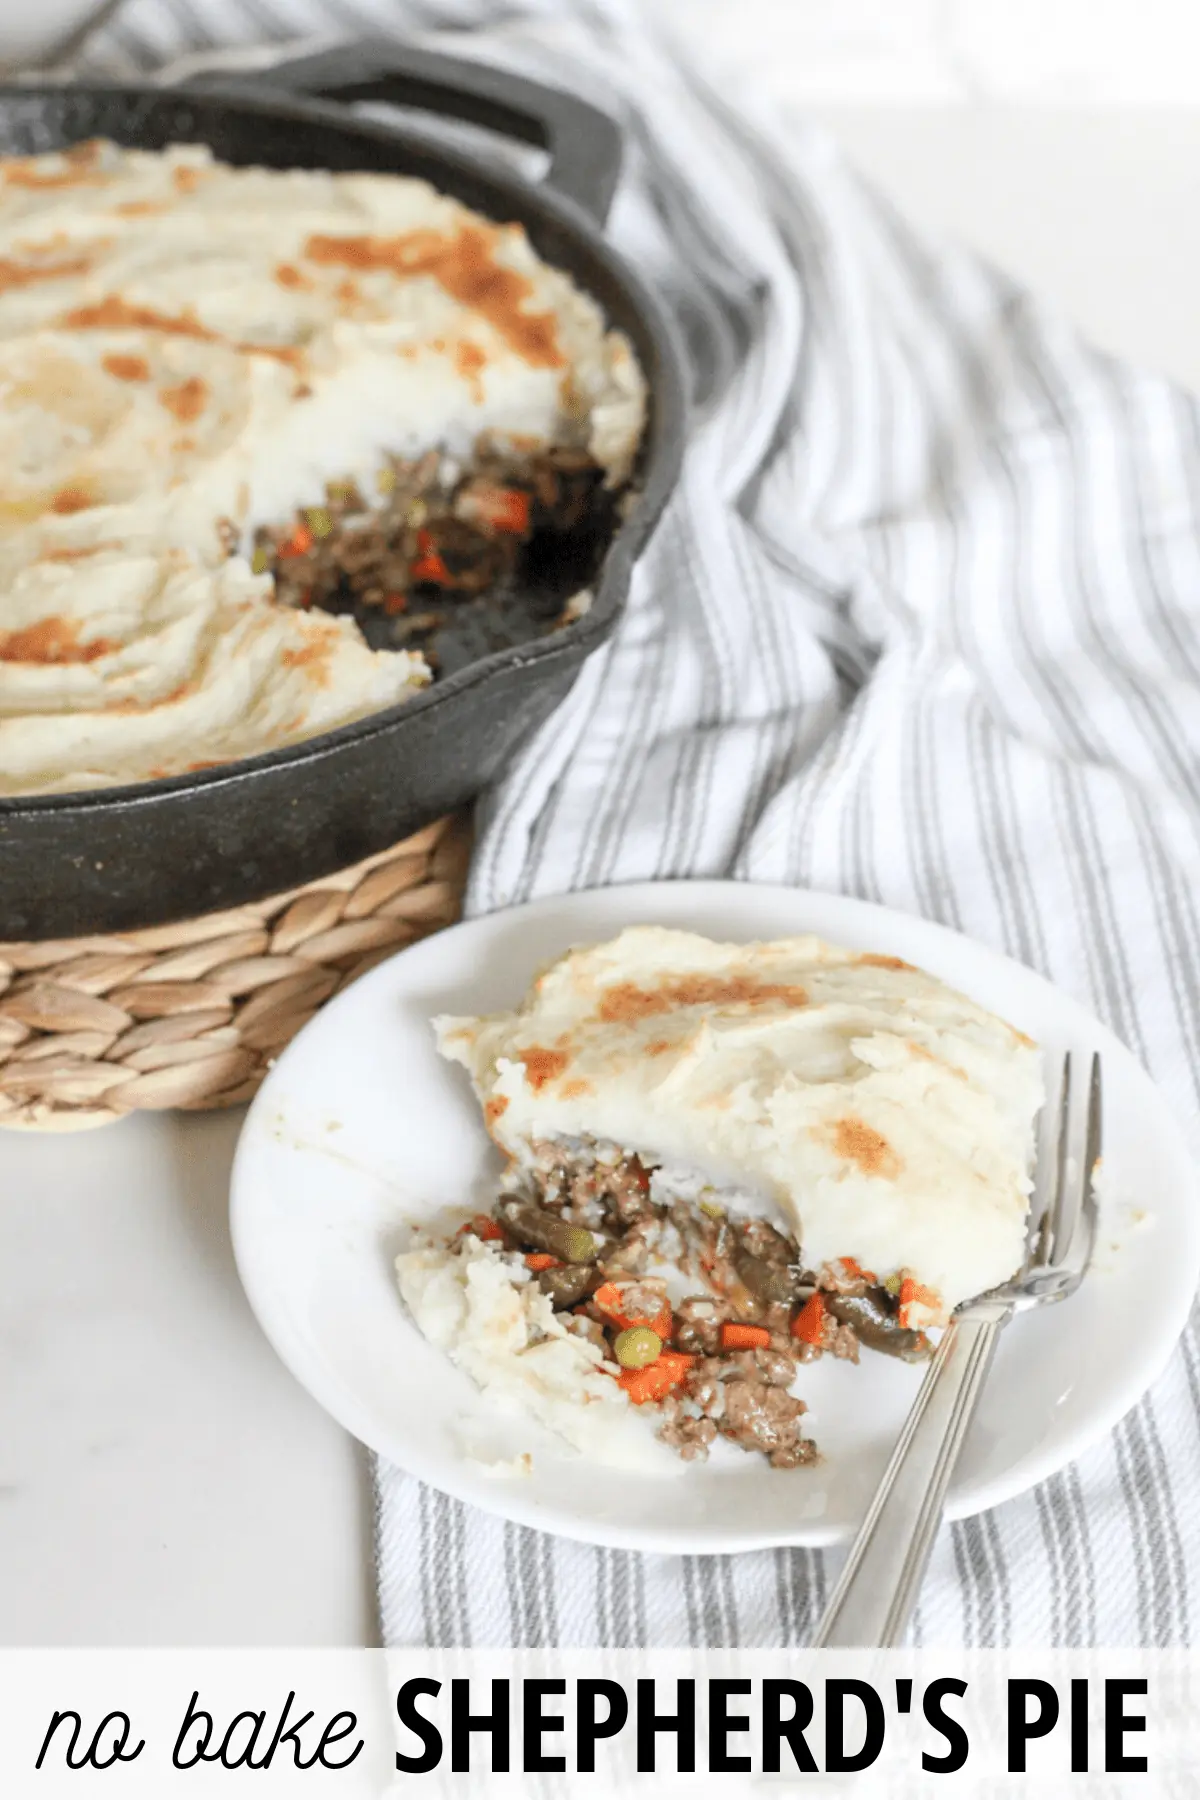 plate of shepherds pie with cast iron pan in the background